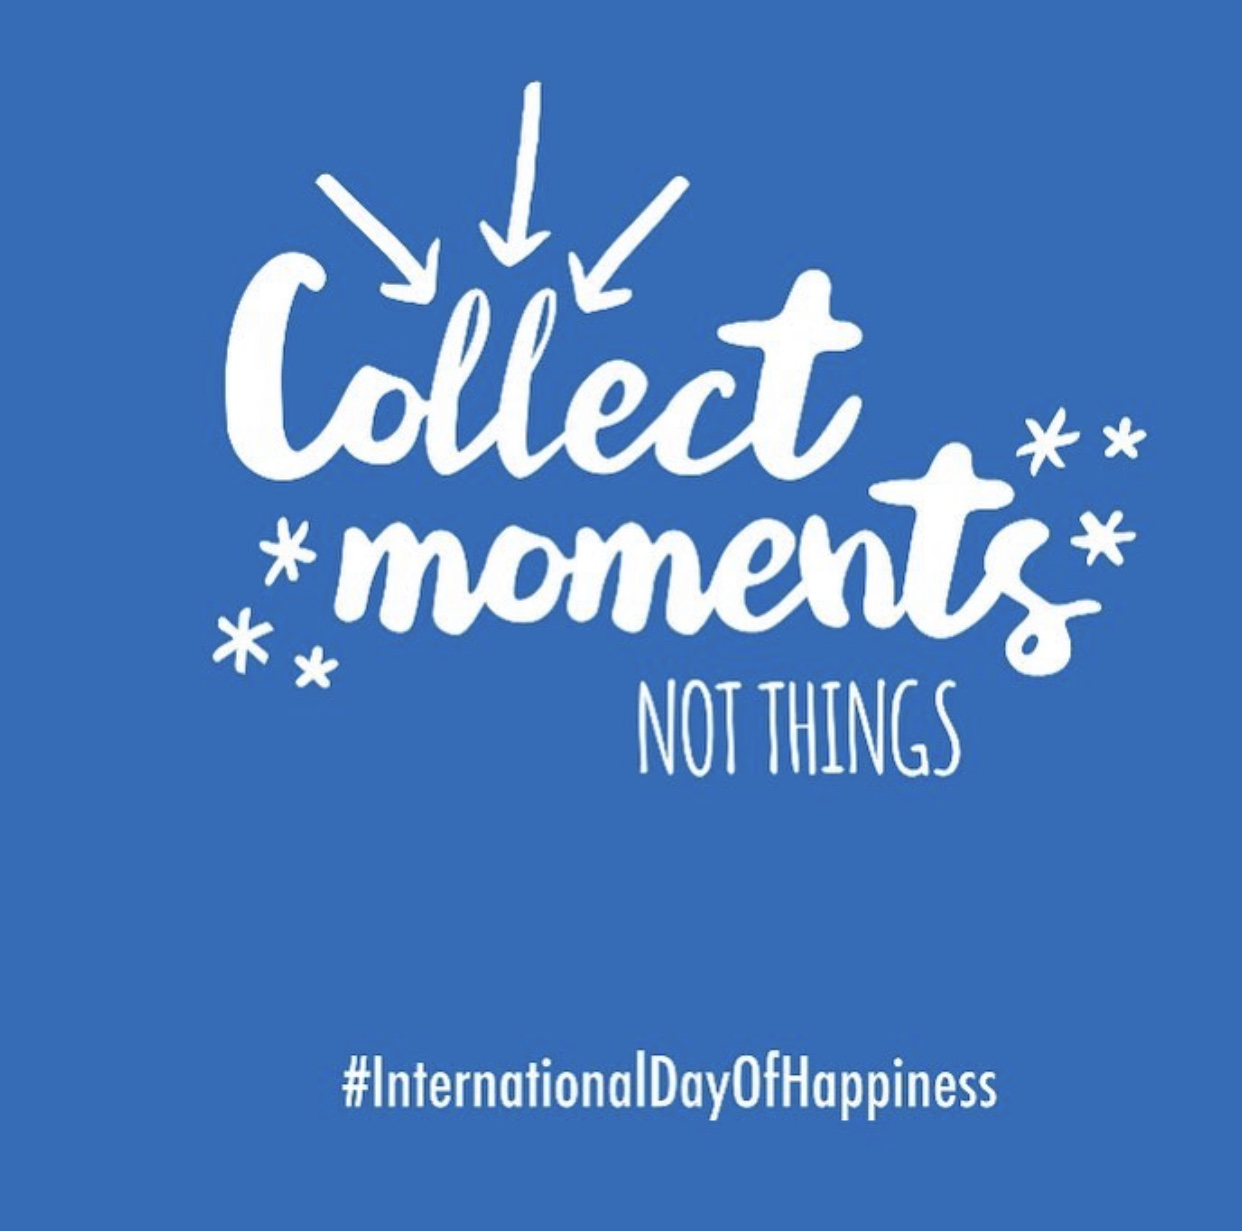 Collect Moments Not Things